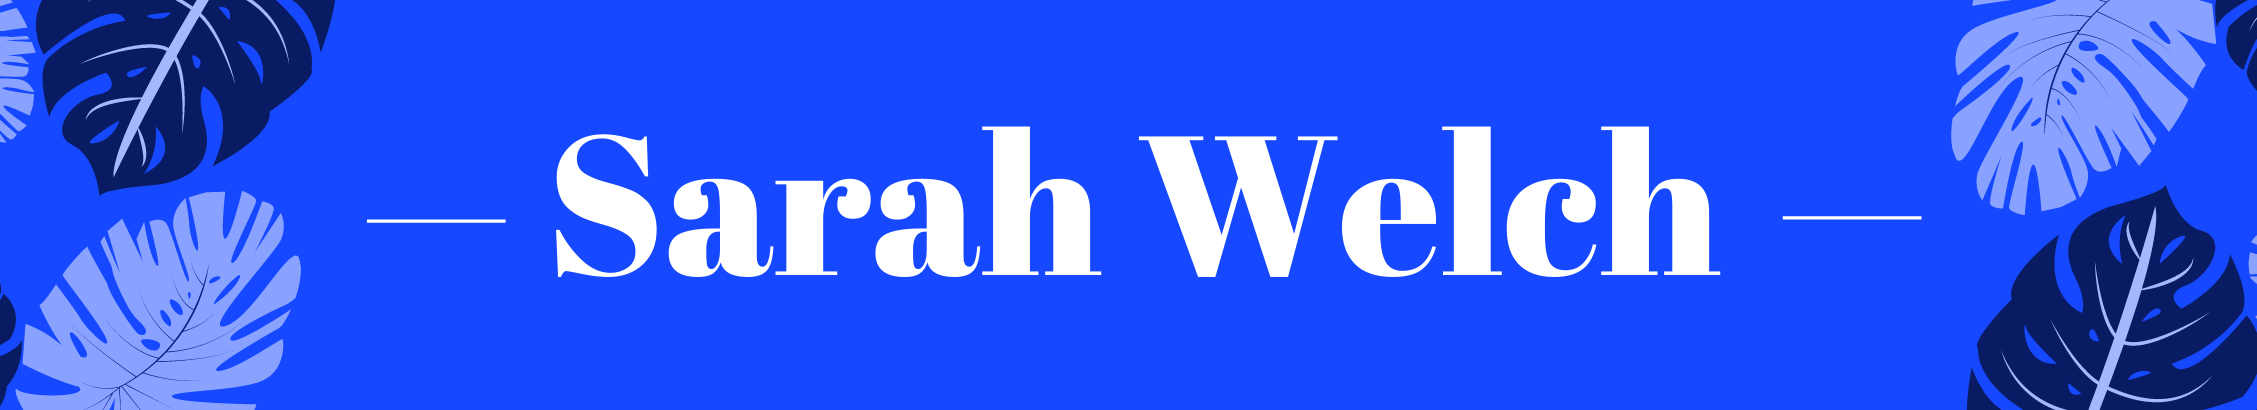 Sarah Welch's profile banner